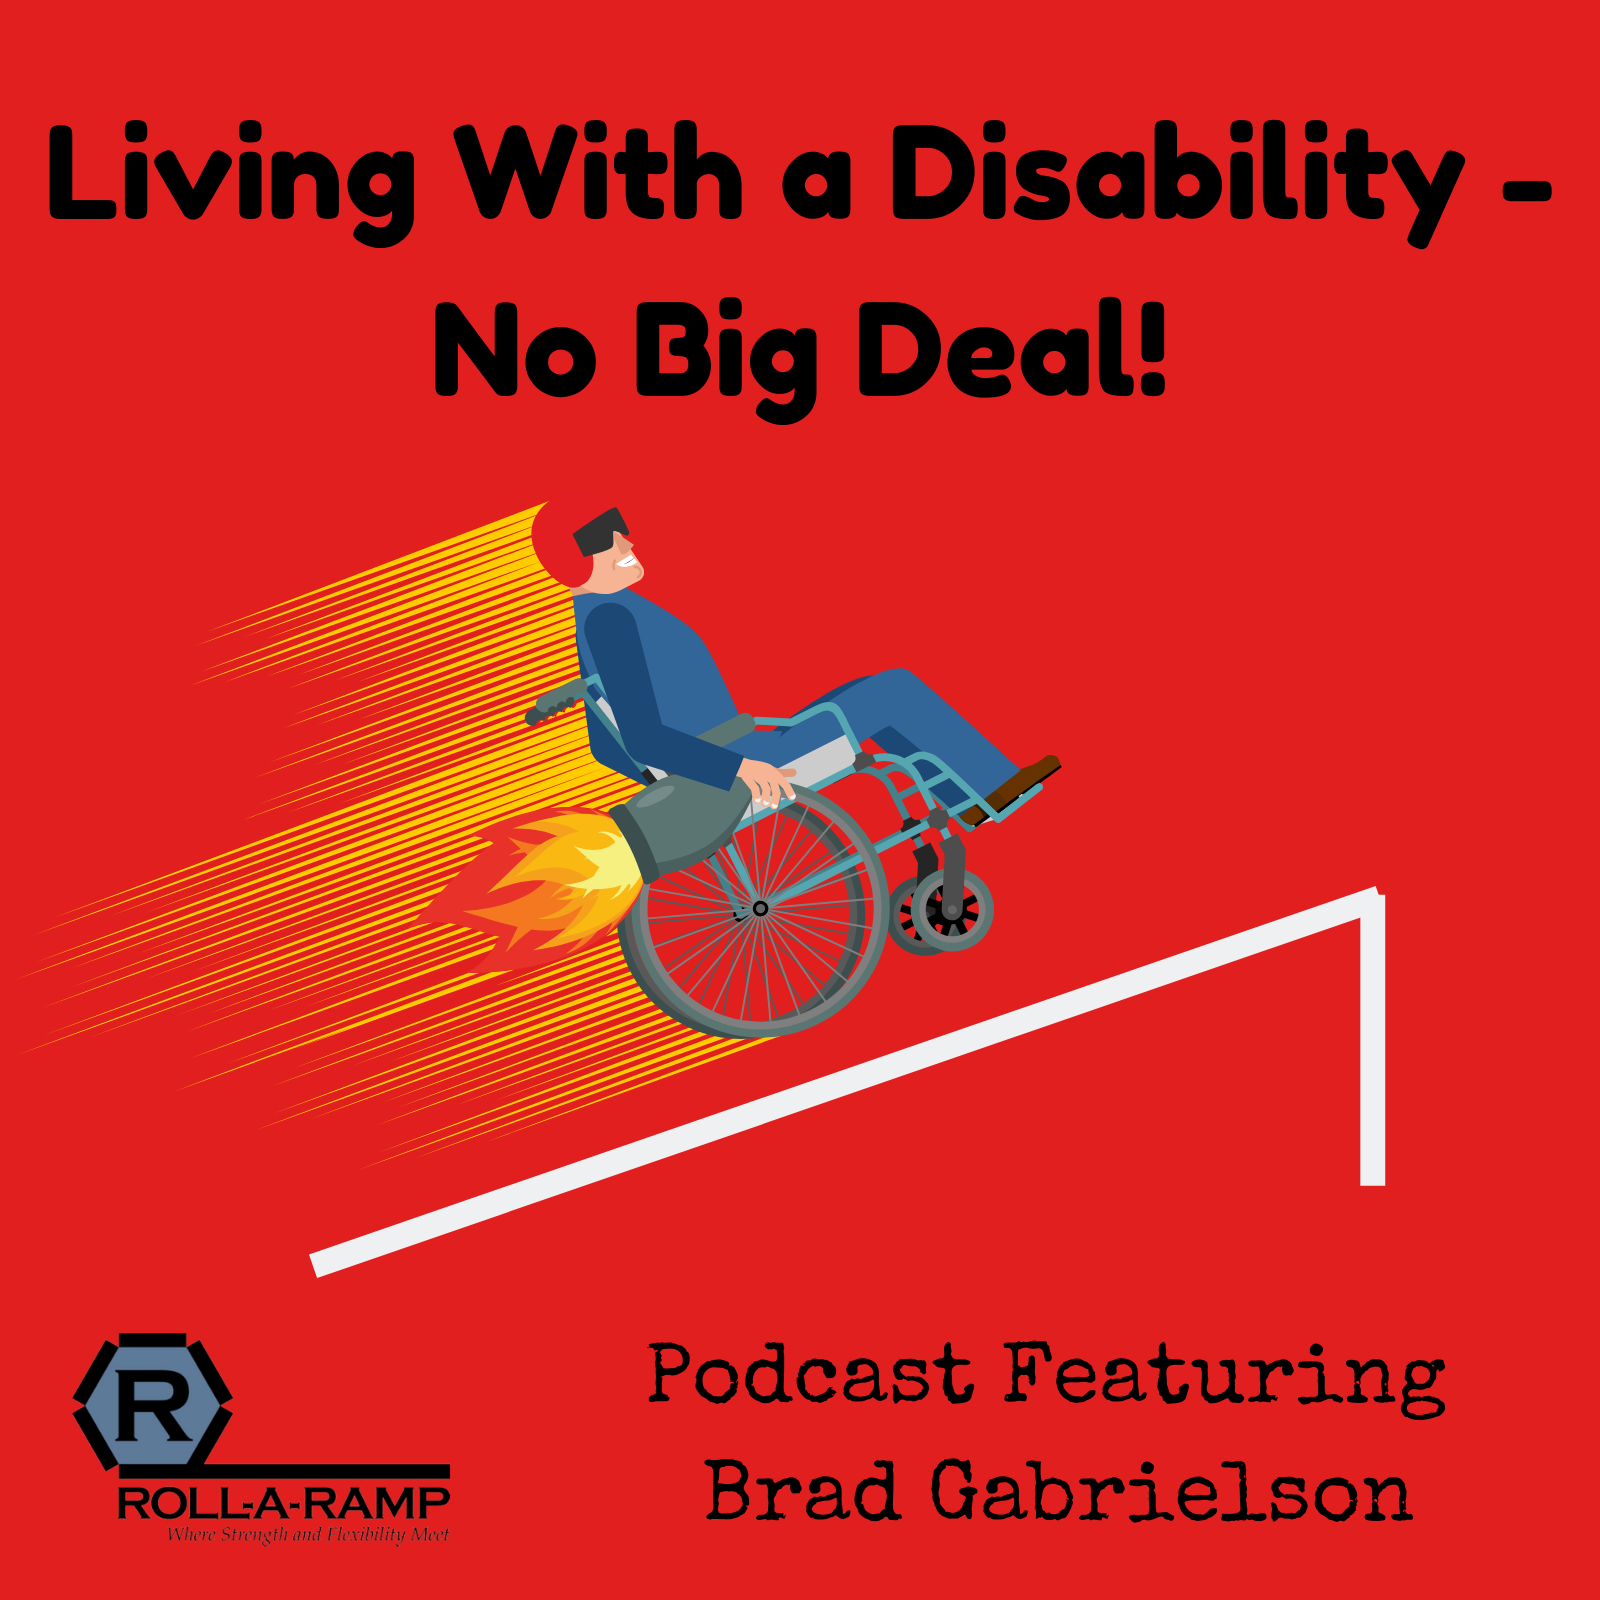 S2 Ep4: Living with Blindness featuring Allan Peterson 